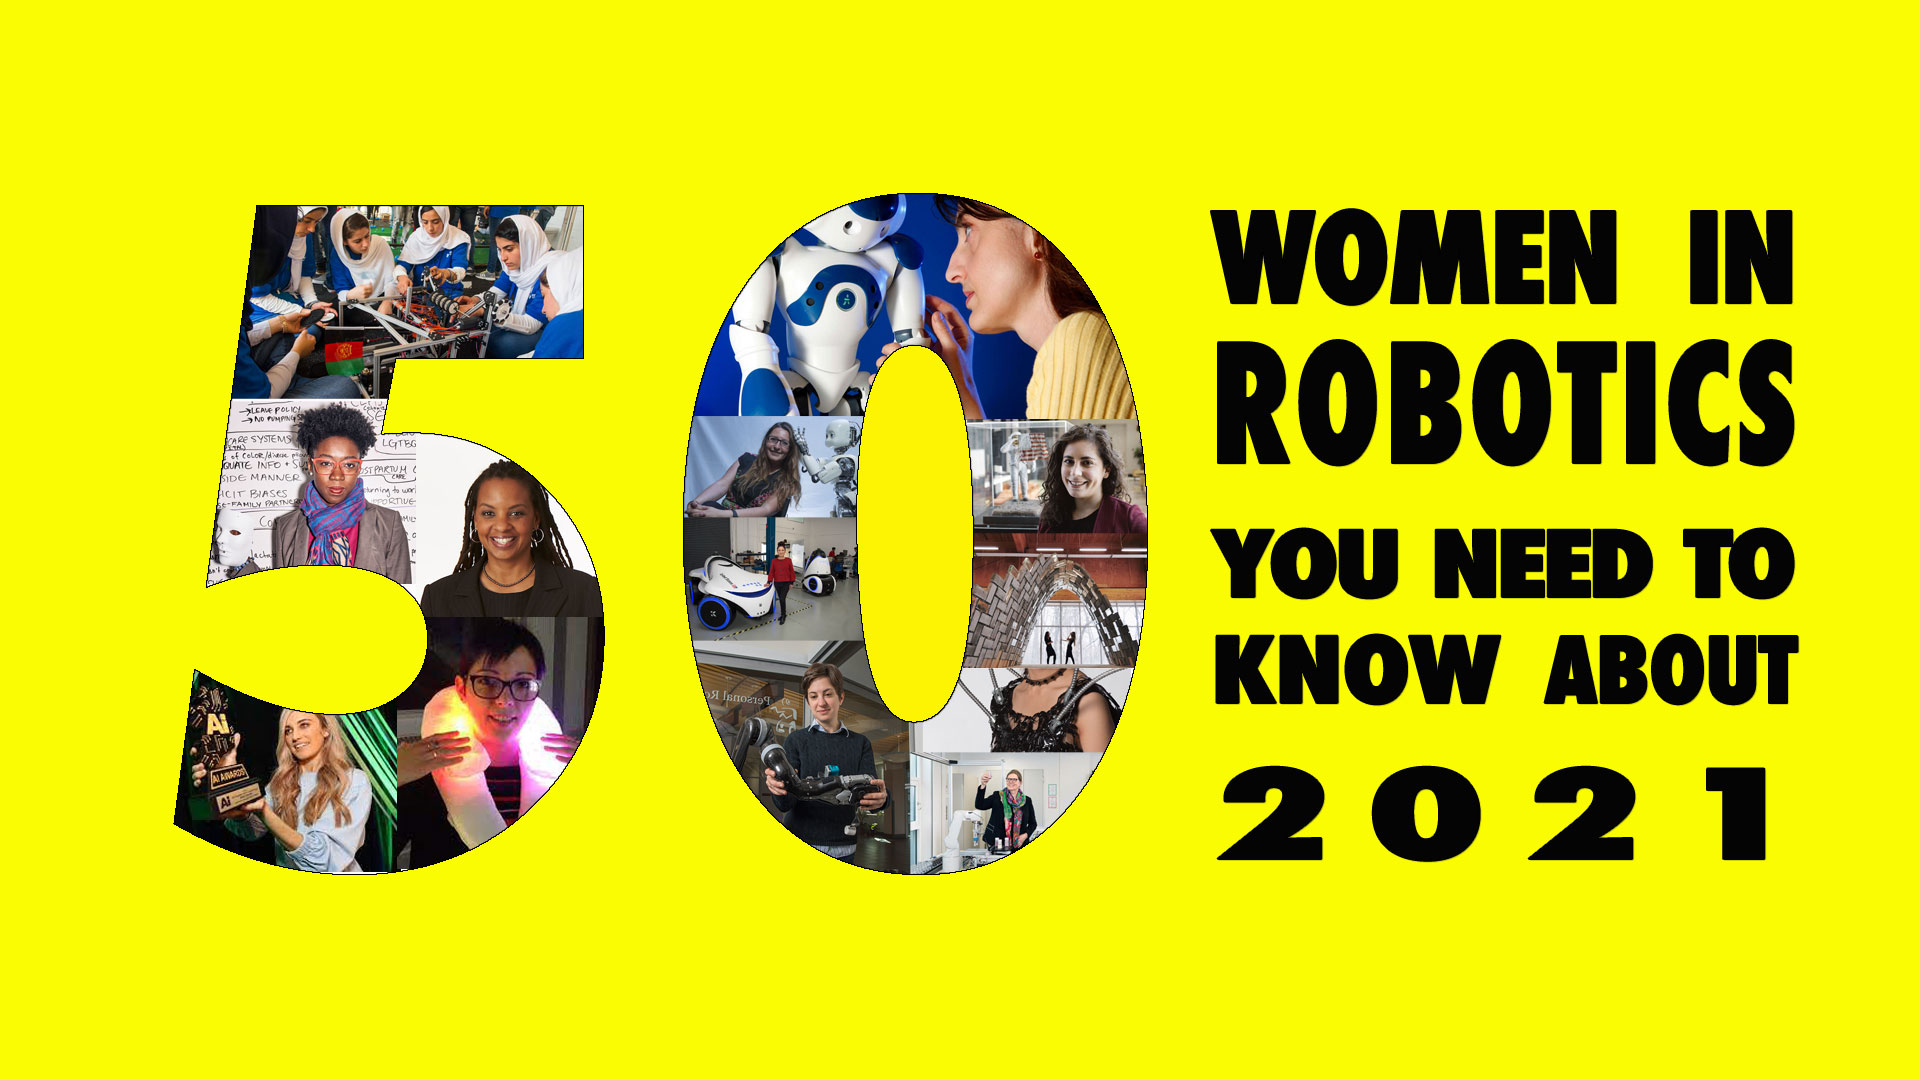 Women in Robotics you need to know about 2021